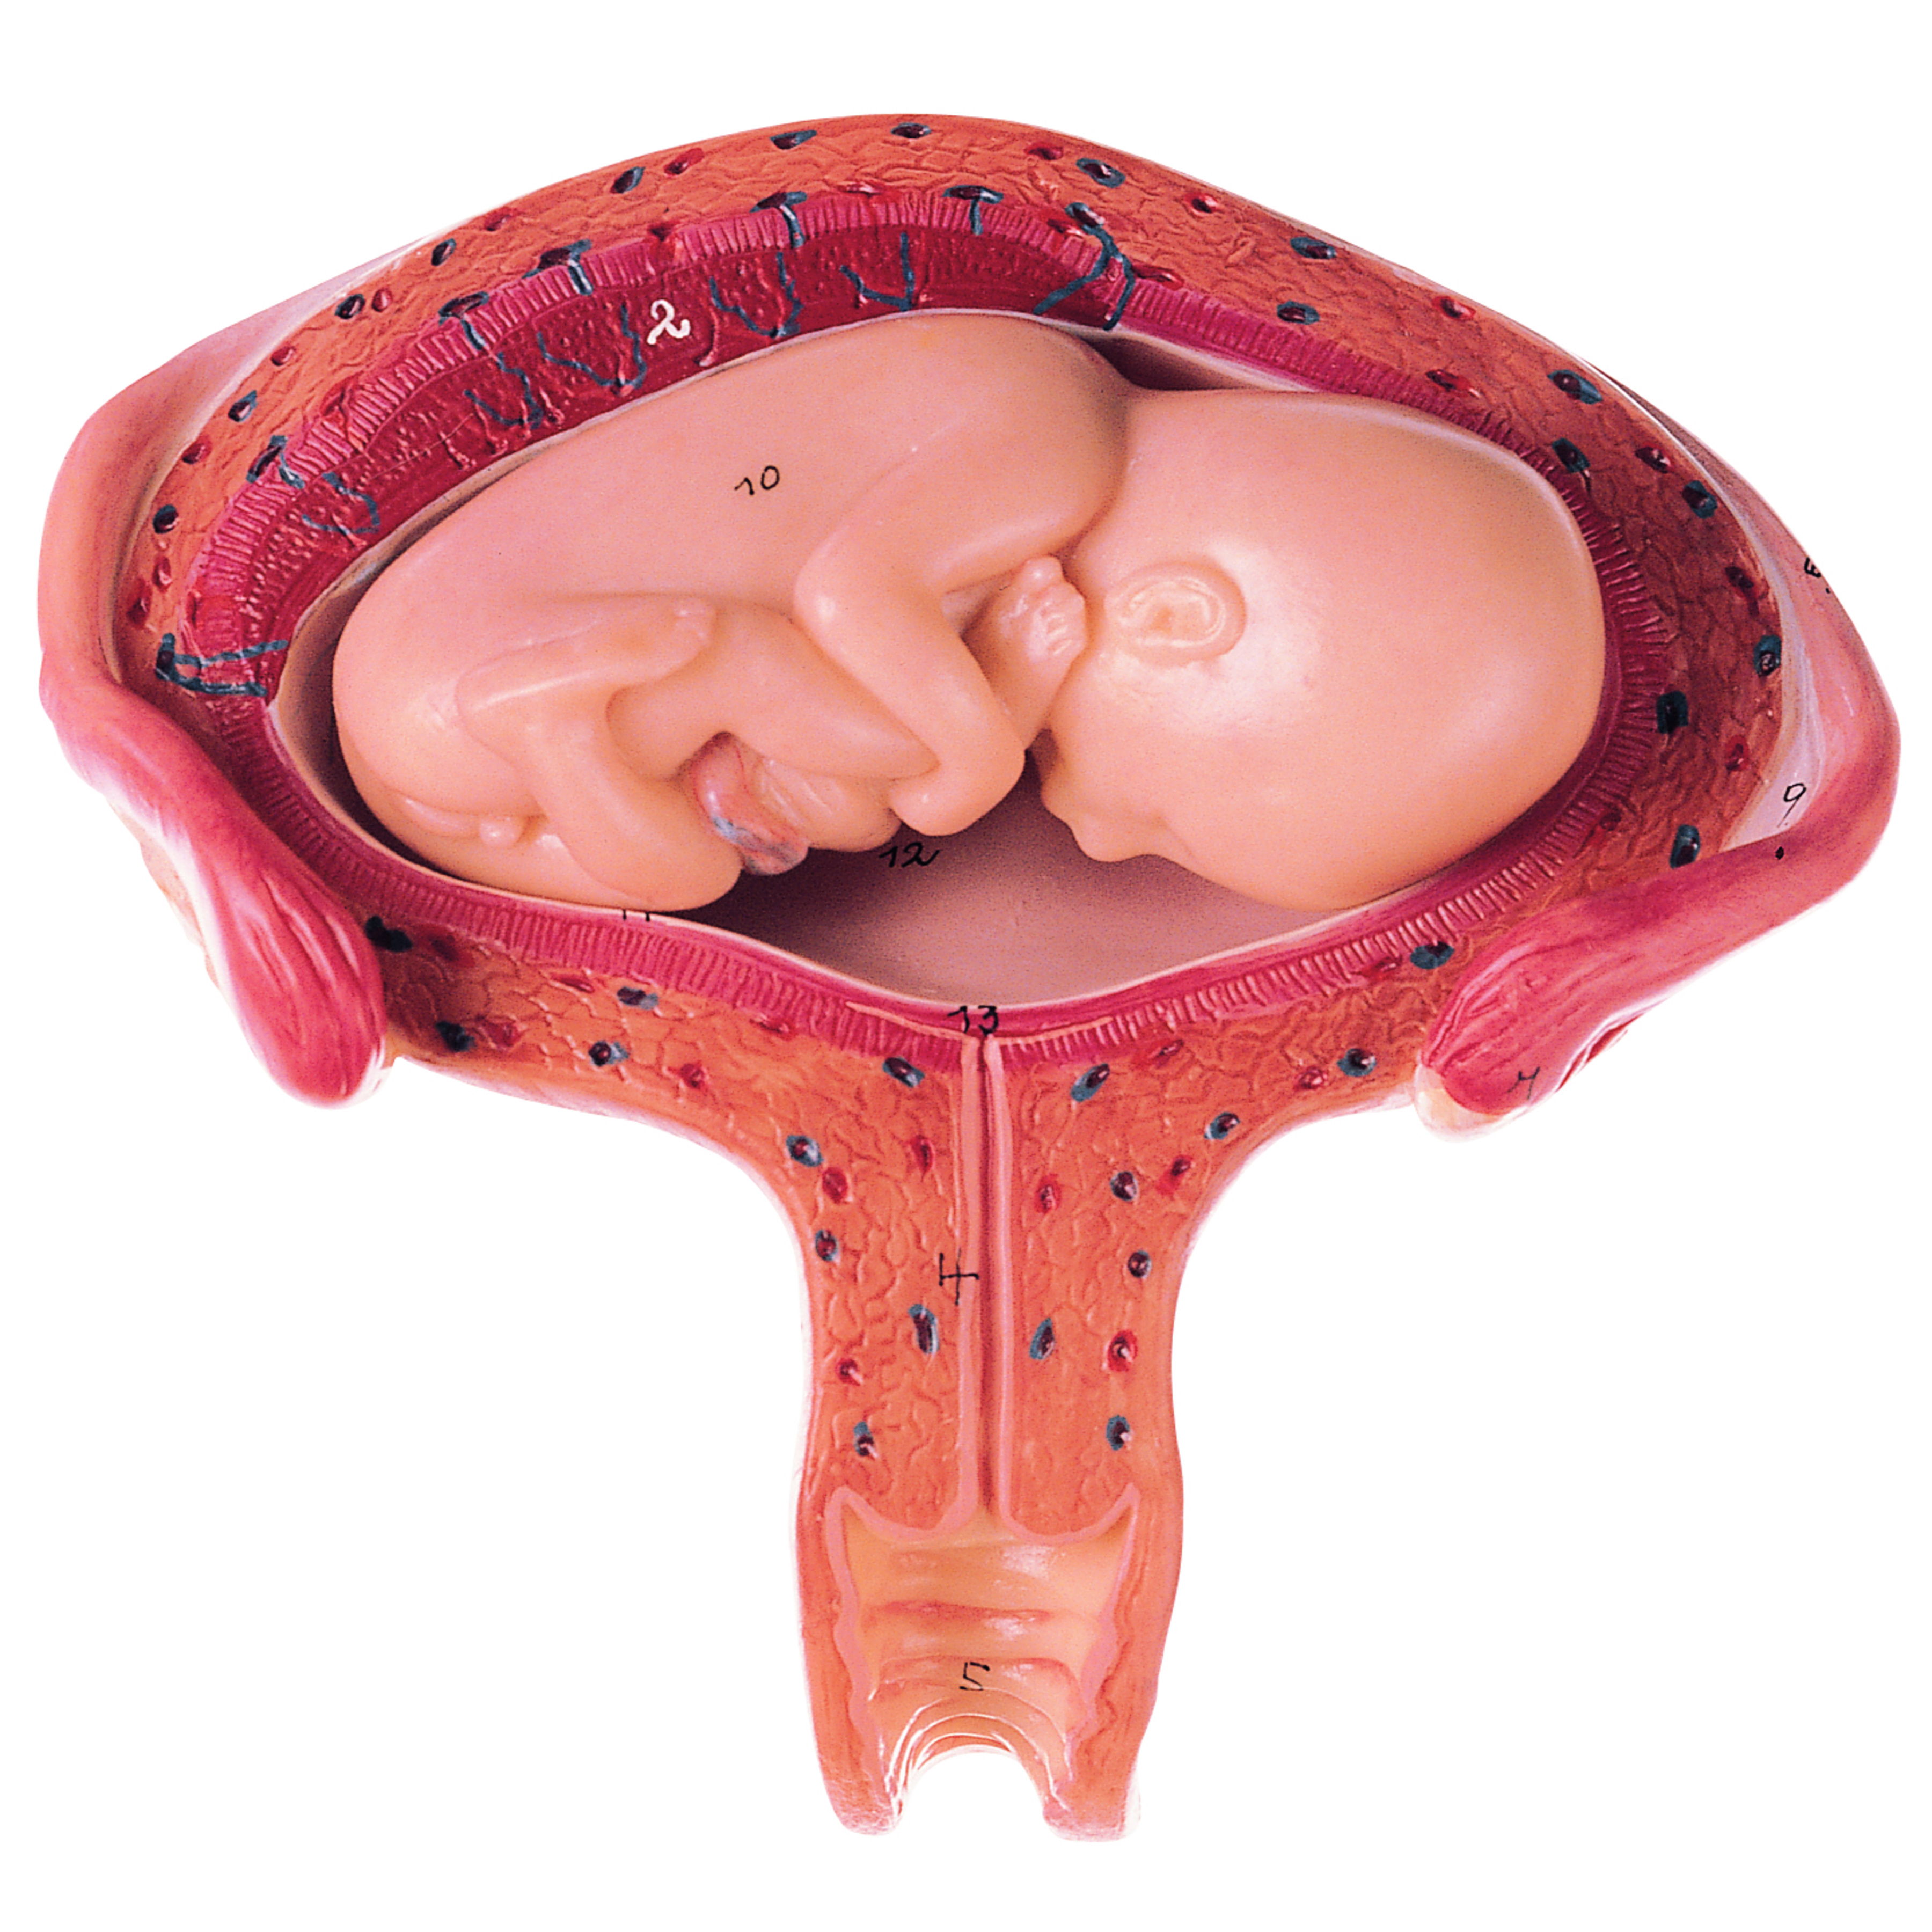 Uterus With Fetus in Fourth to Fifth Month